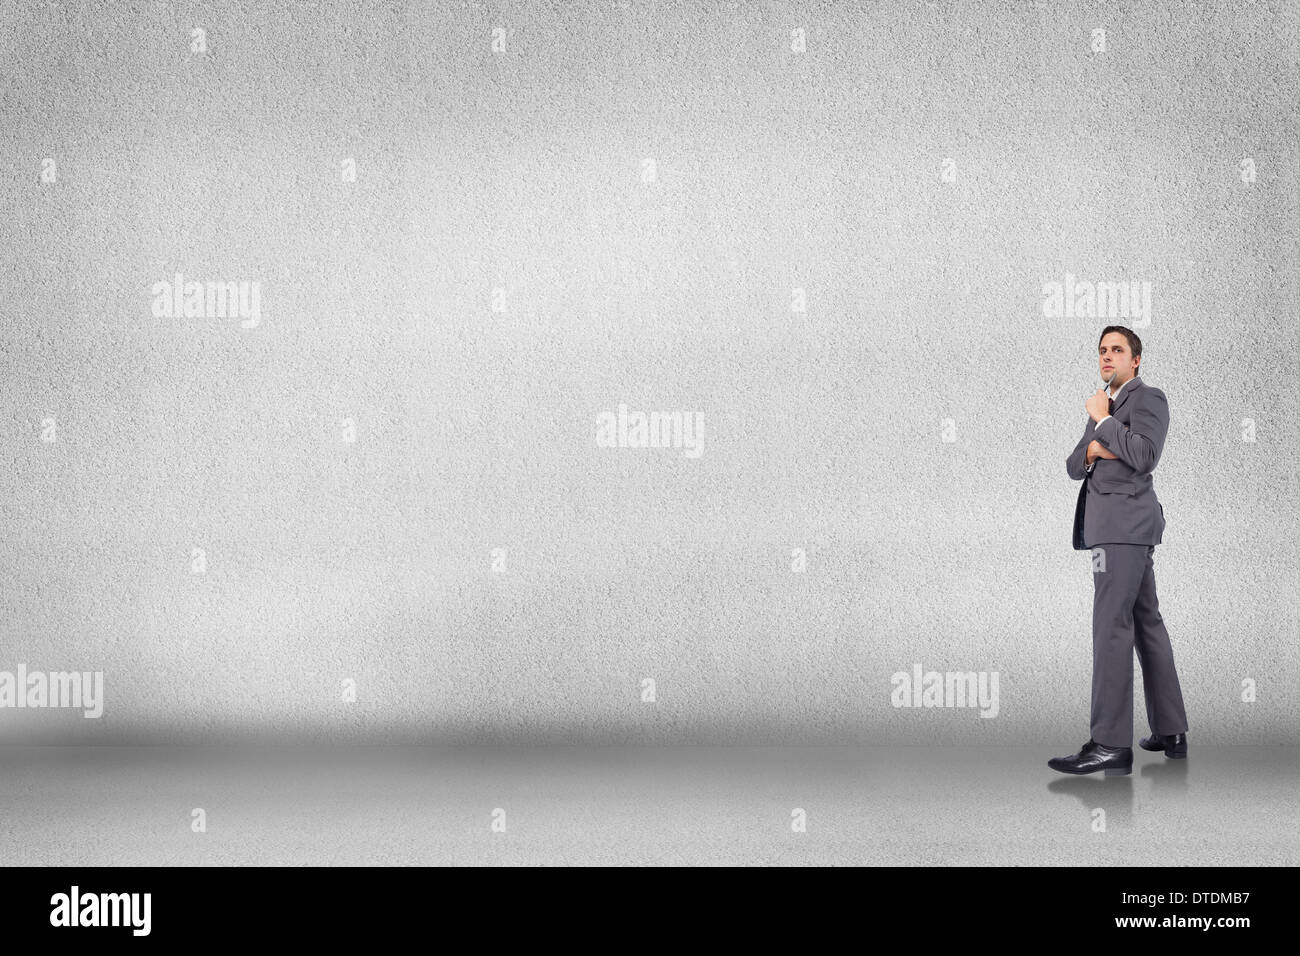 Composite image of thoughtful businessman holding pen to chin Stock Photo